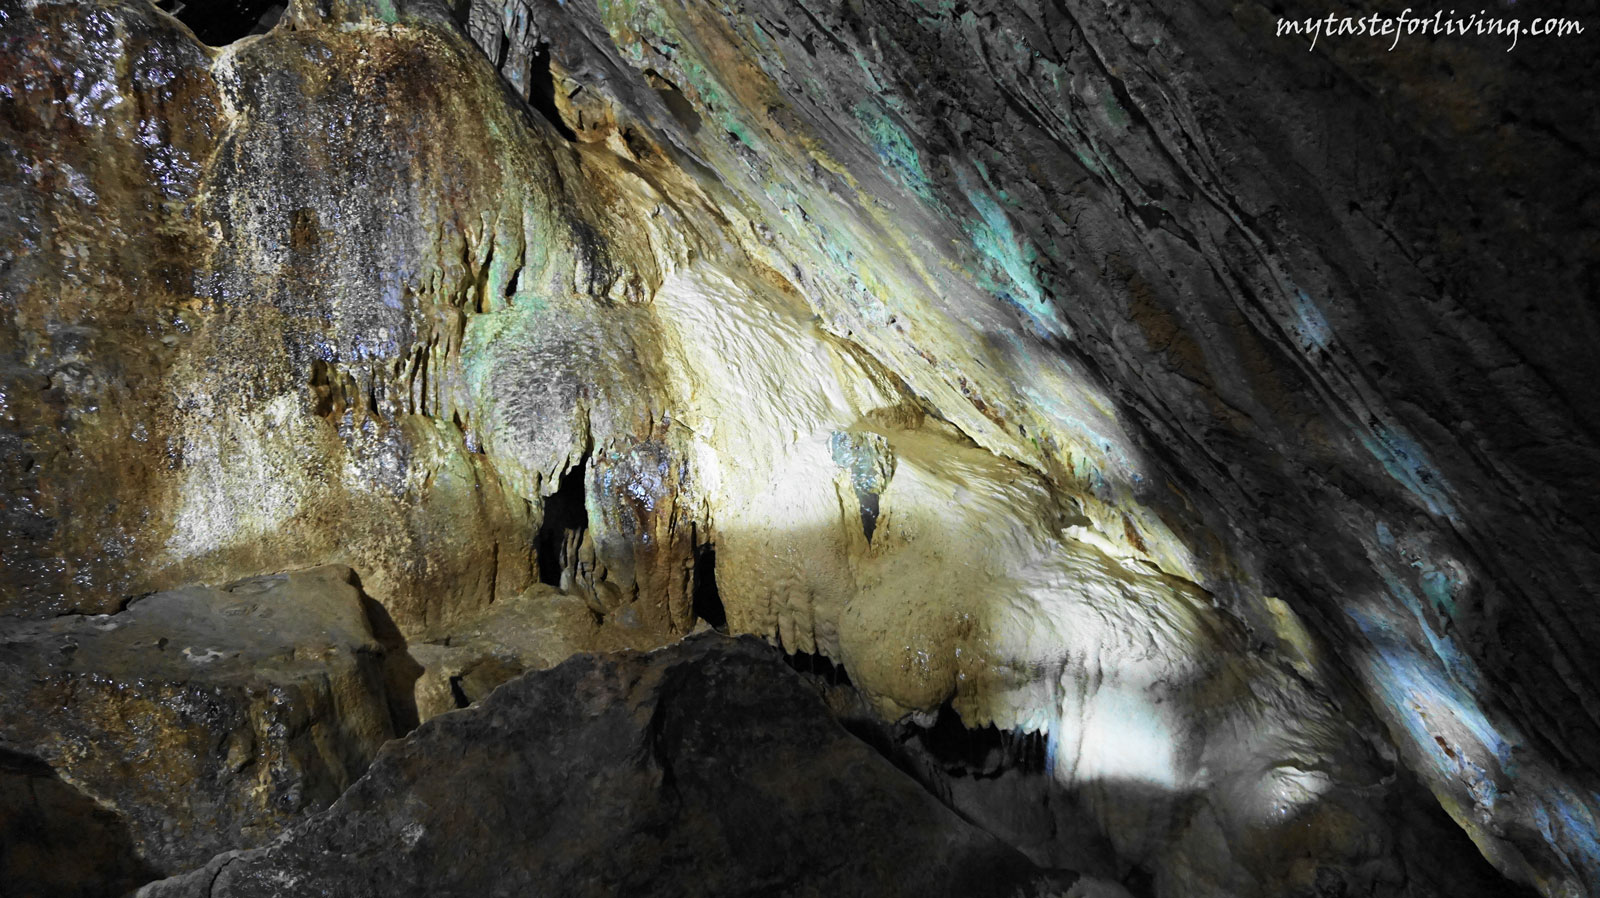 The Bucegi Mountain is made up of an exceptionally large variety of rock formations that you can enjoy. Ialomita cave (Peștera Ialomiței) is one of them. It is located in the heart of the Bucegi mountain, the municipality of Moroeni, Romania, about 30 km from the town of Sinaia.